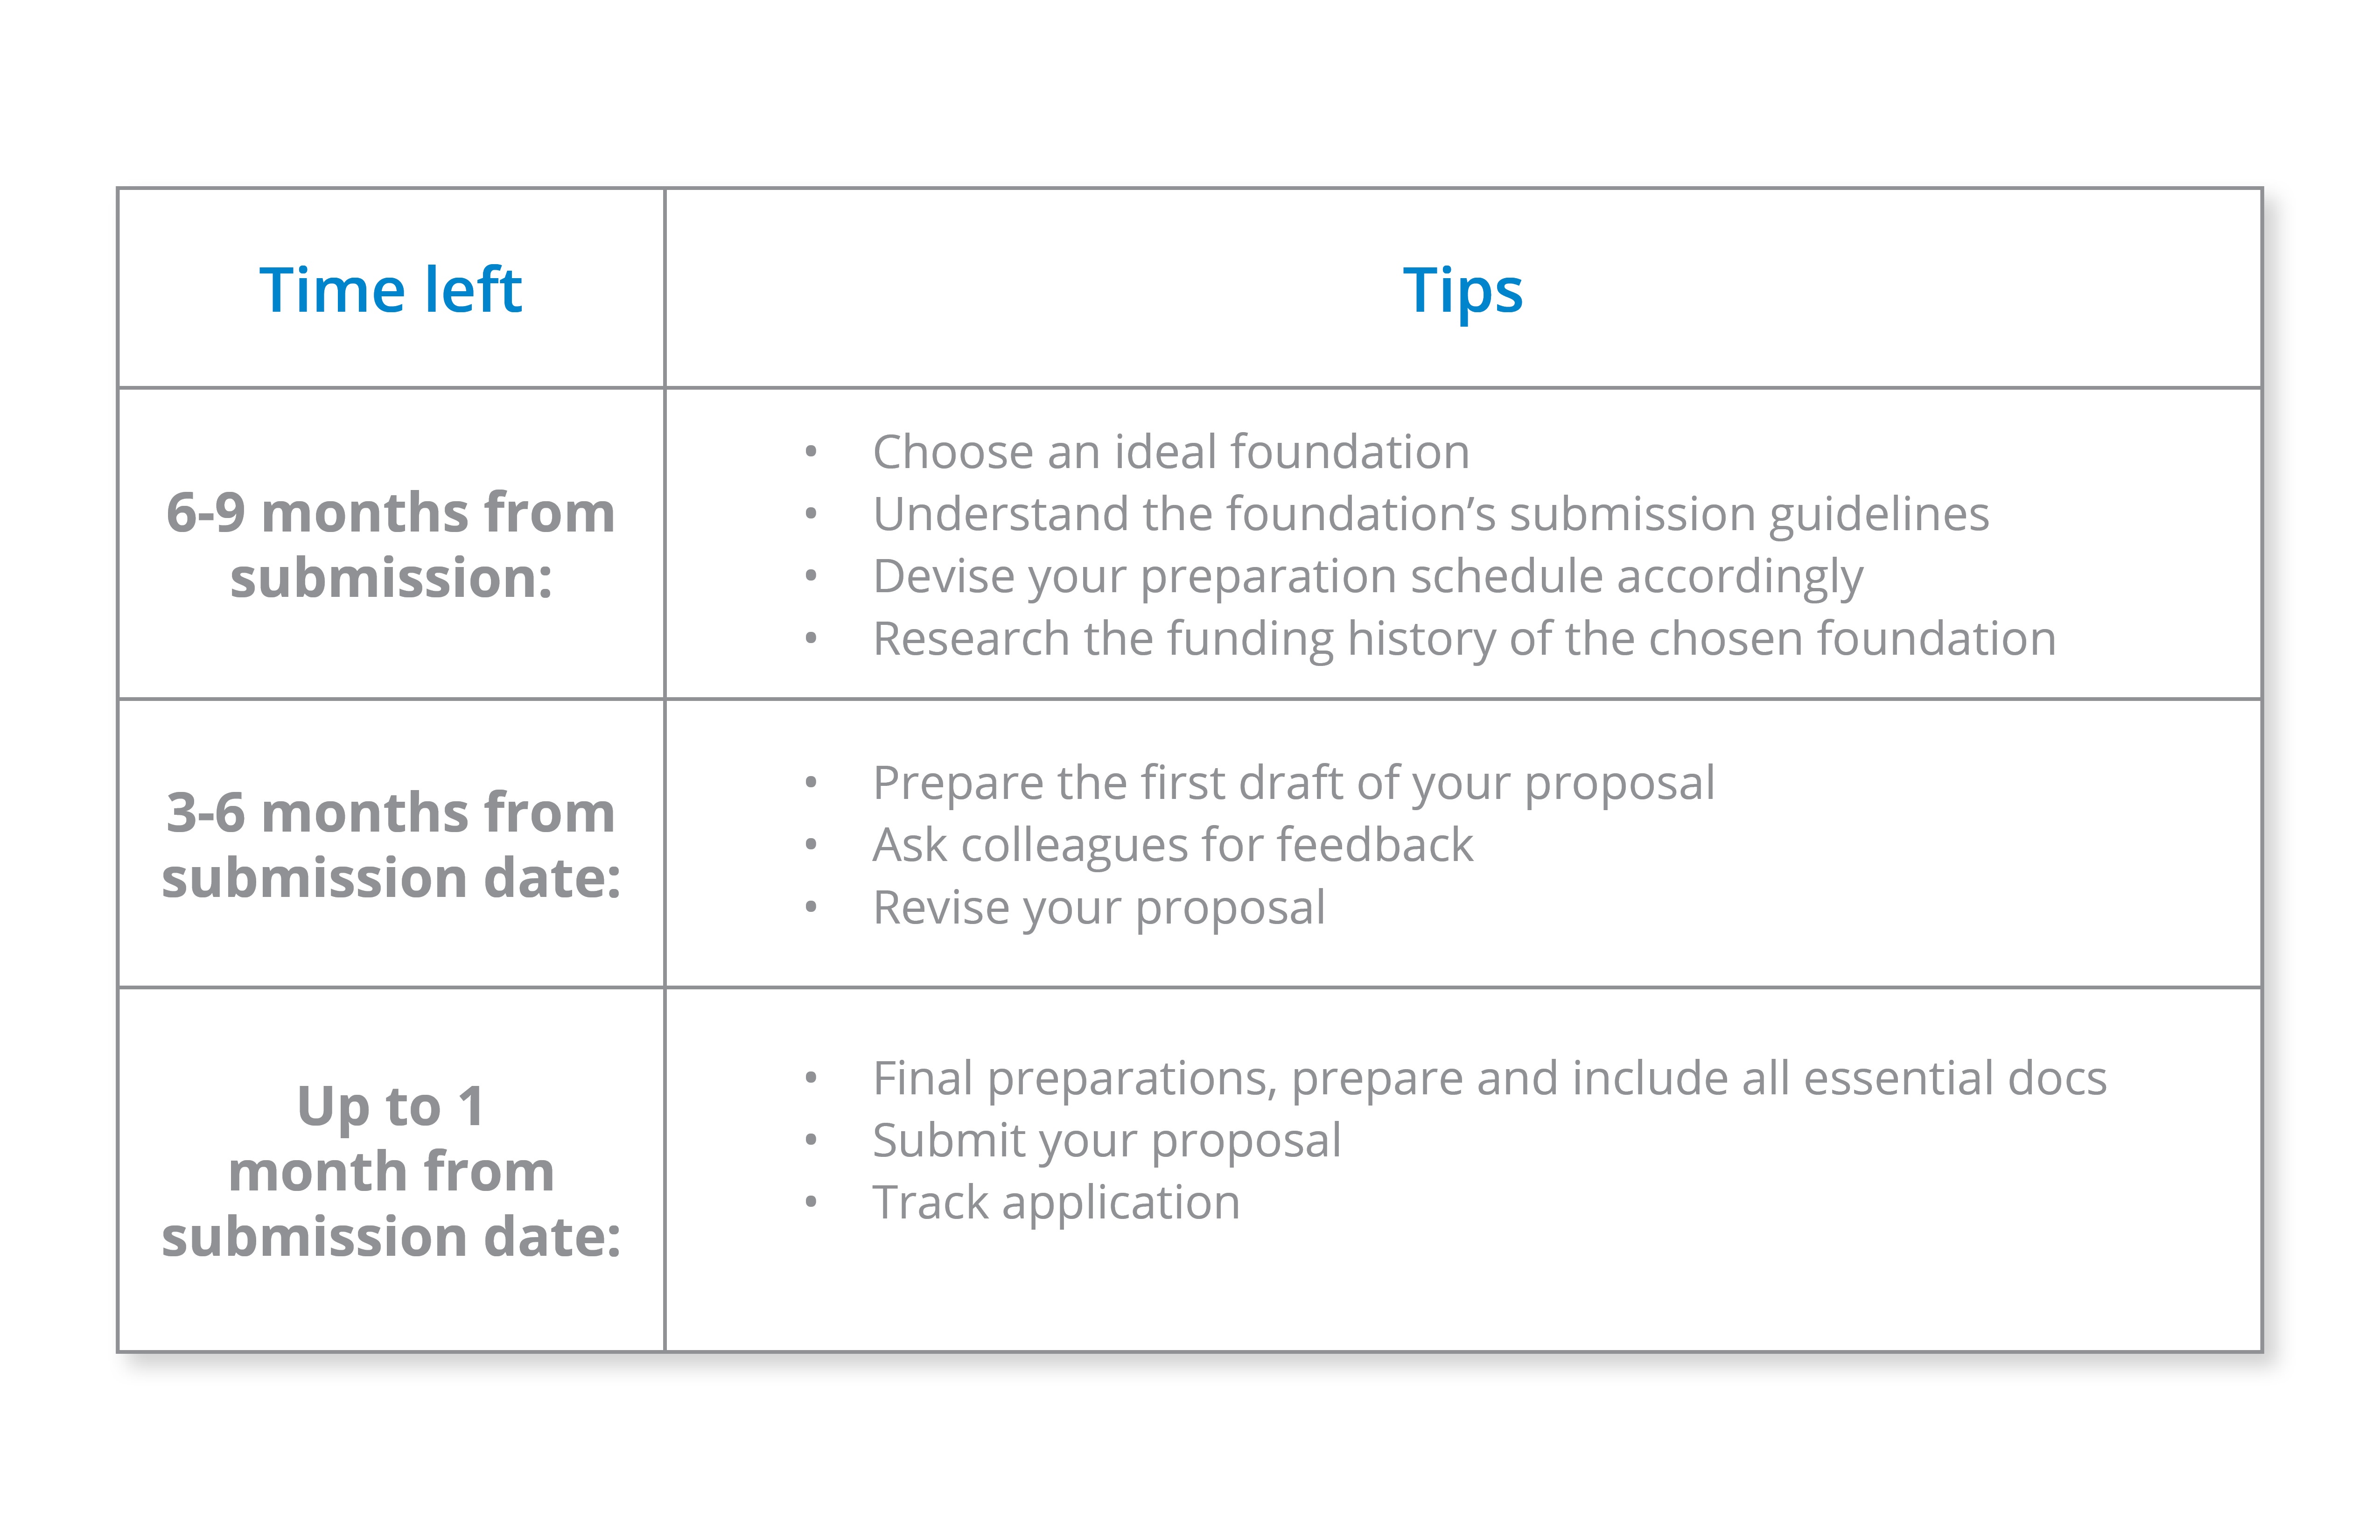 The Planning Process of Writing Grant Proposals - PaperTrue Blog